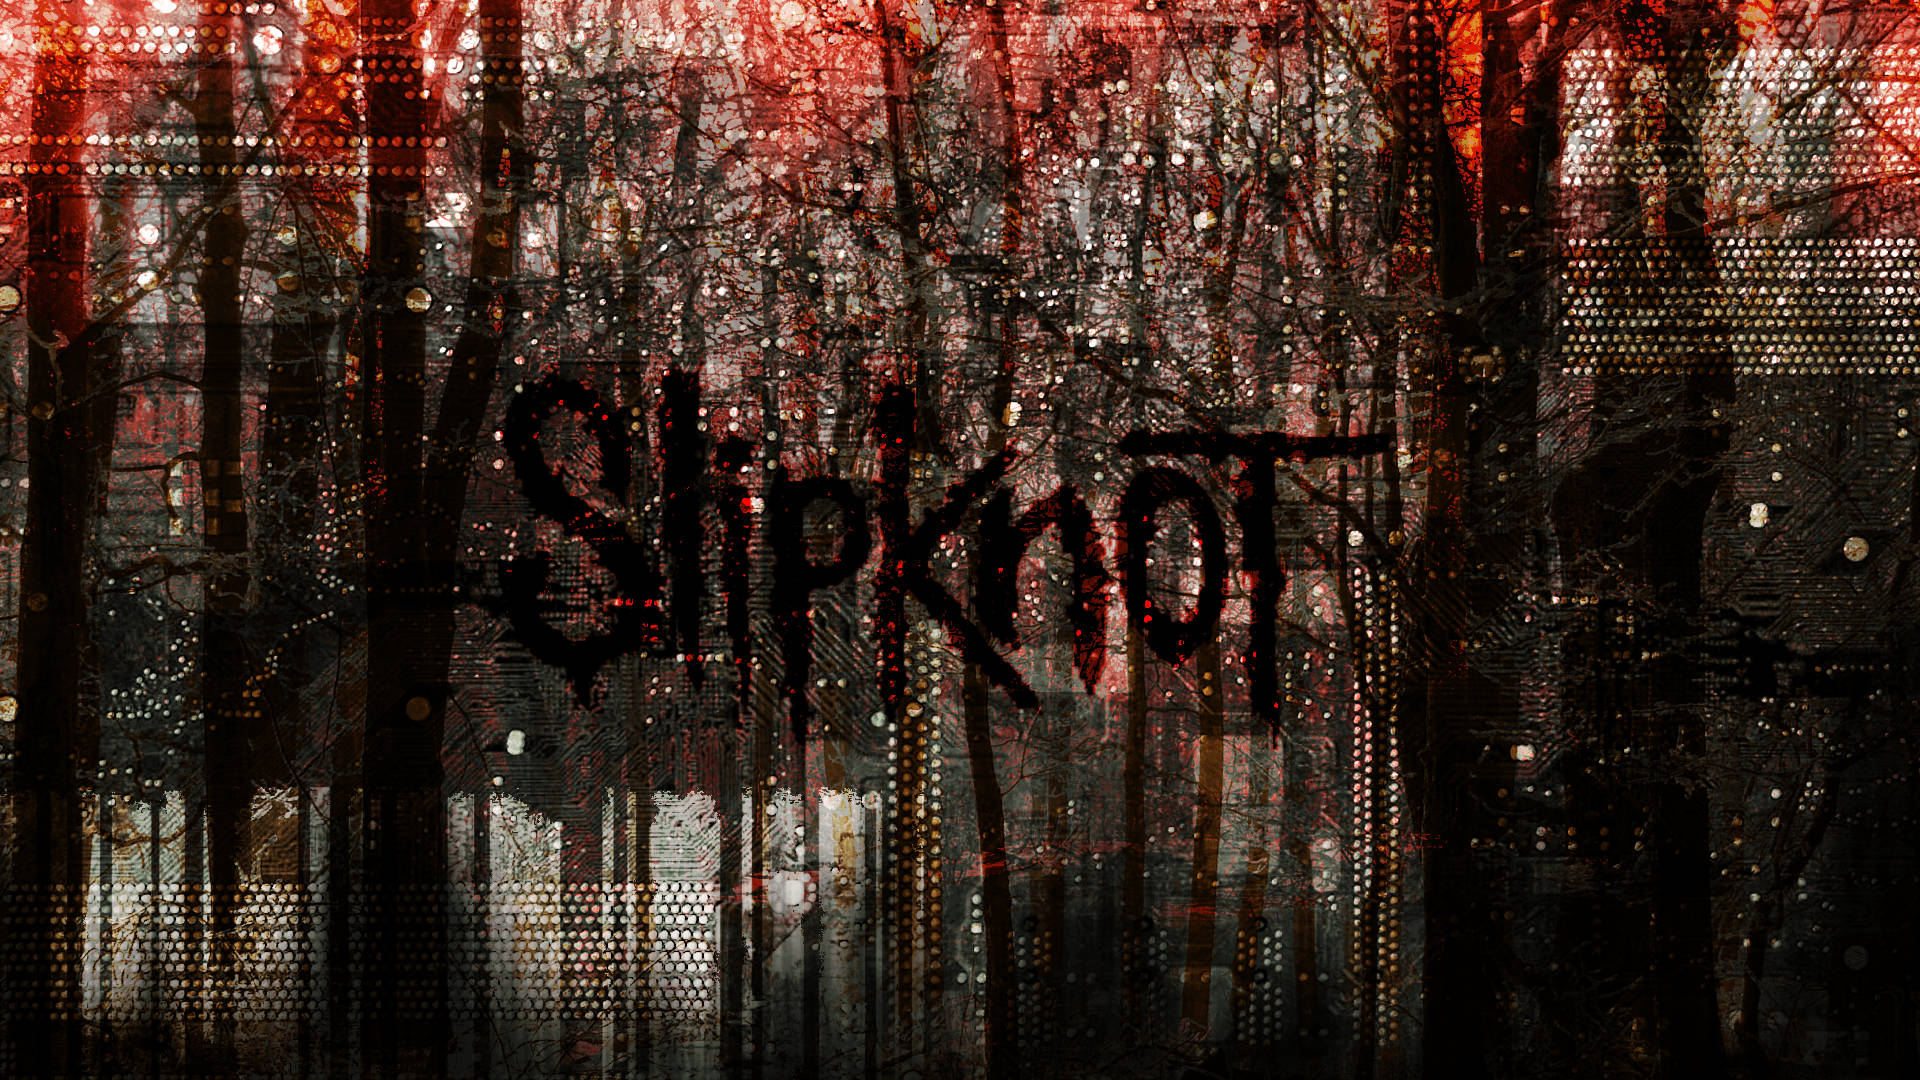 Slipknot Band Name With Blood Wallpaper